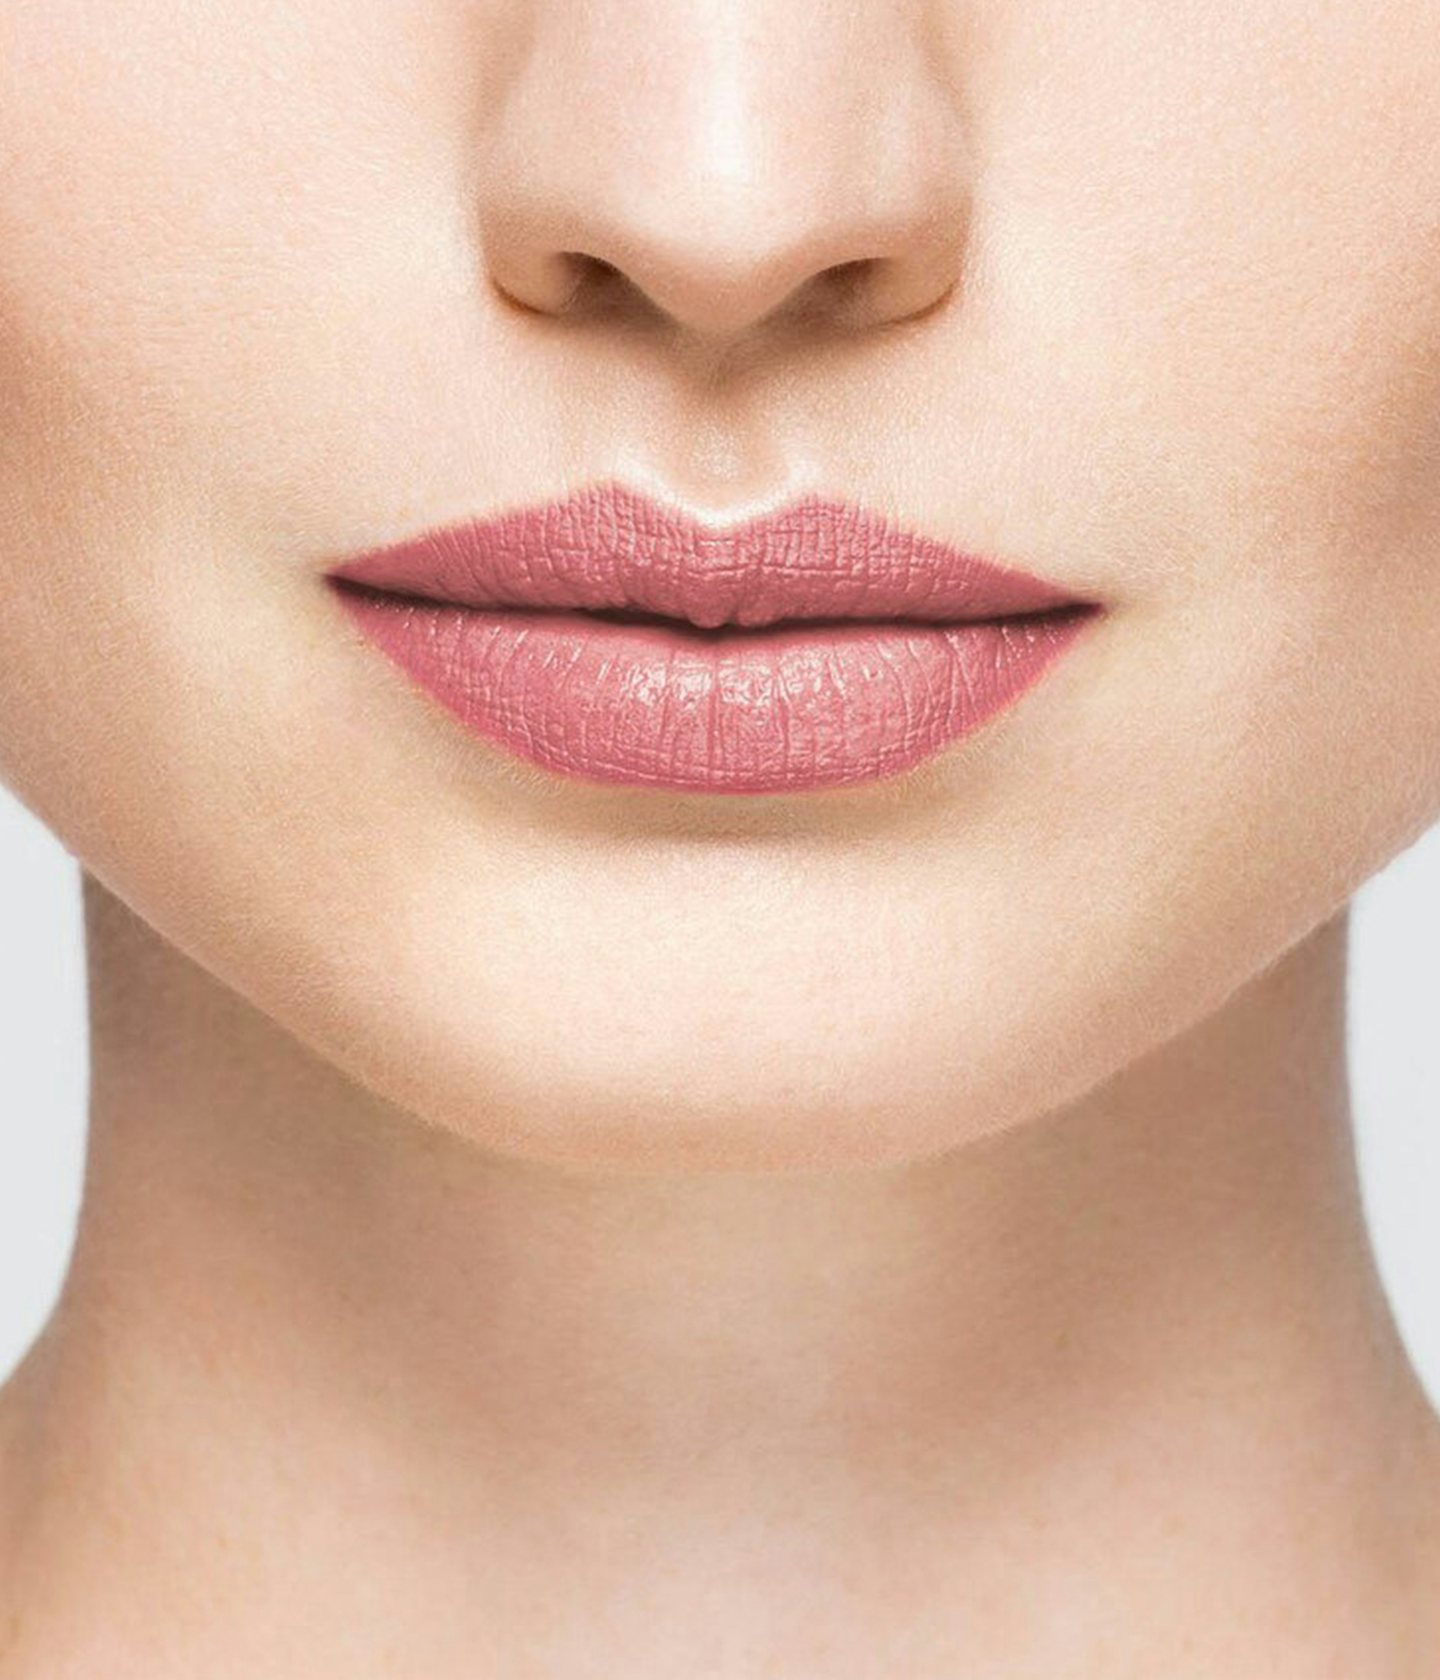 La bouche rouge Nude Pink lipstick shade on the lips of a fair skin model